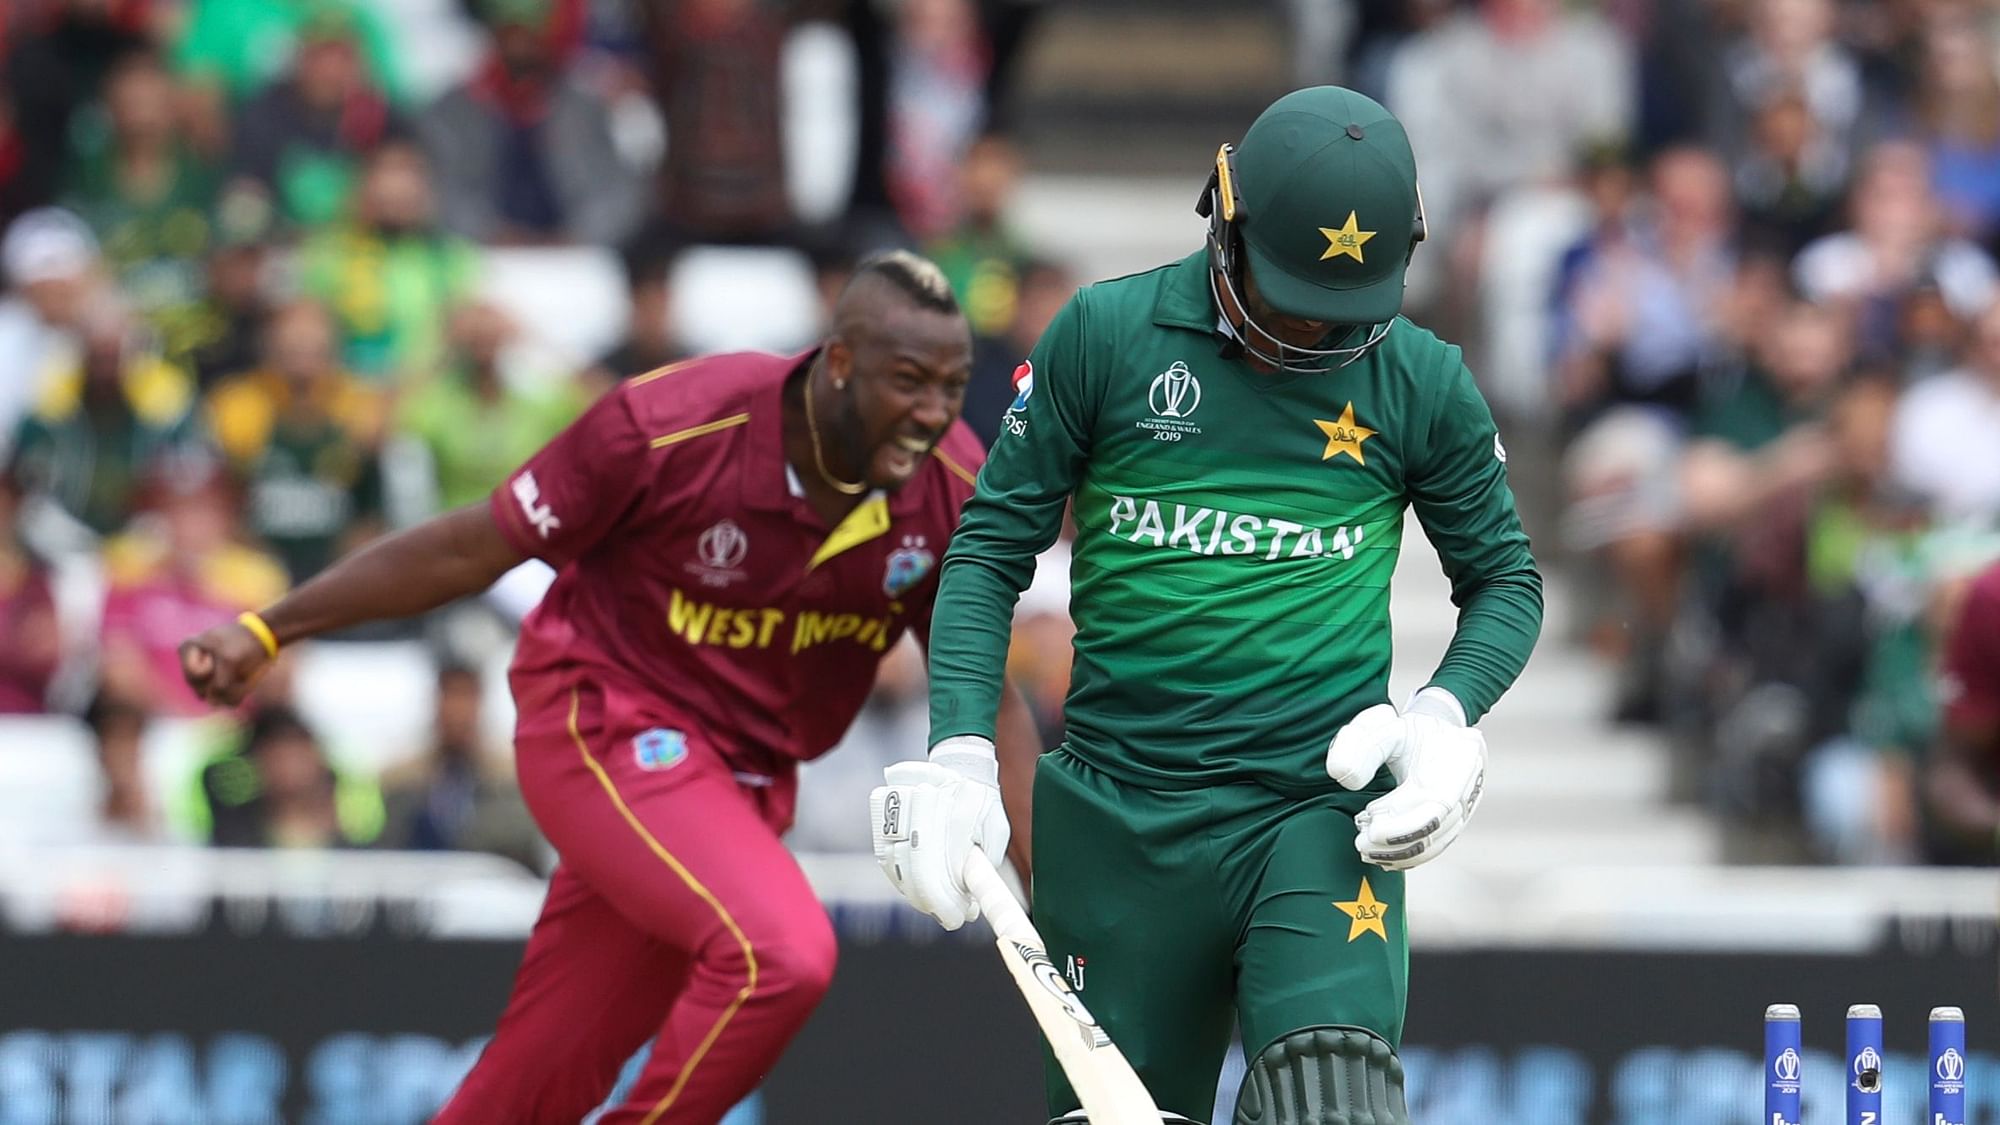 Pakistan’s Shadab Khan walks off the field, bowled by West Indies’ Andre Russell, during their Cricket World Cup match at Trent Bridge cricket ground in Nottingham, England, Friday, May 31, 2019.